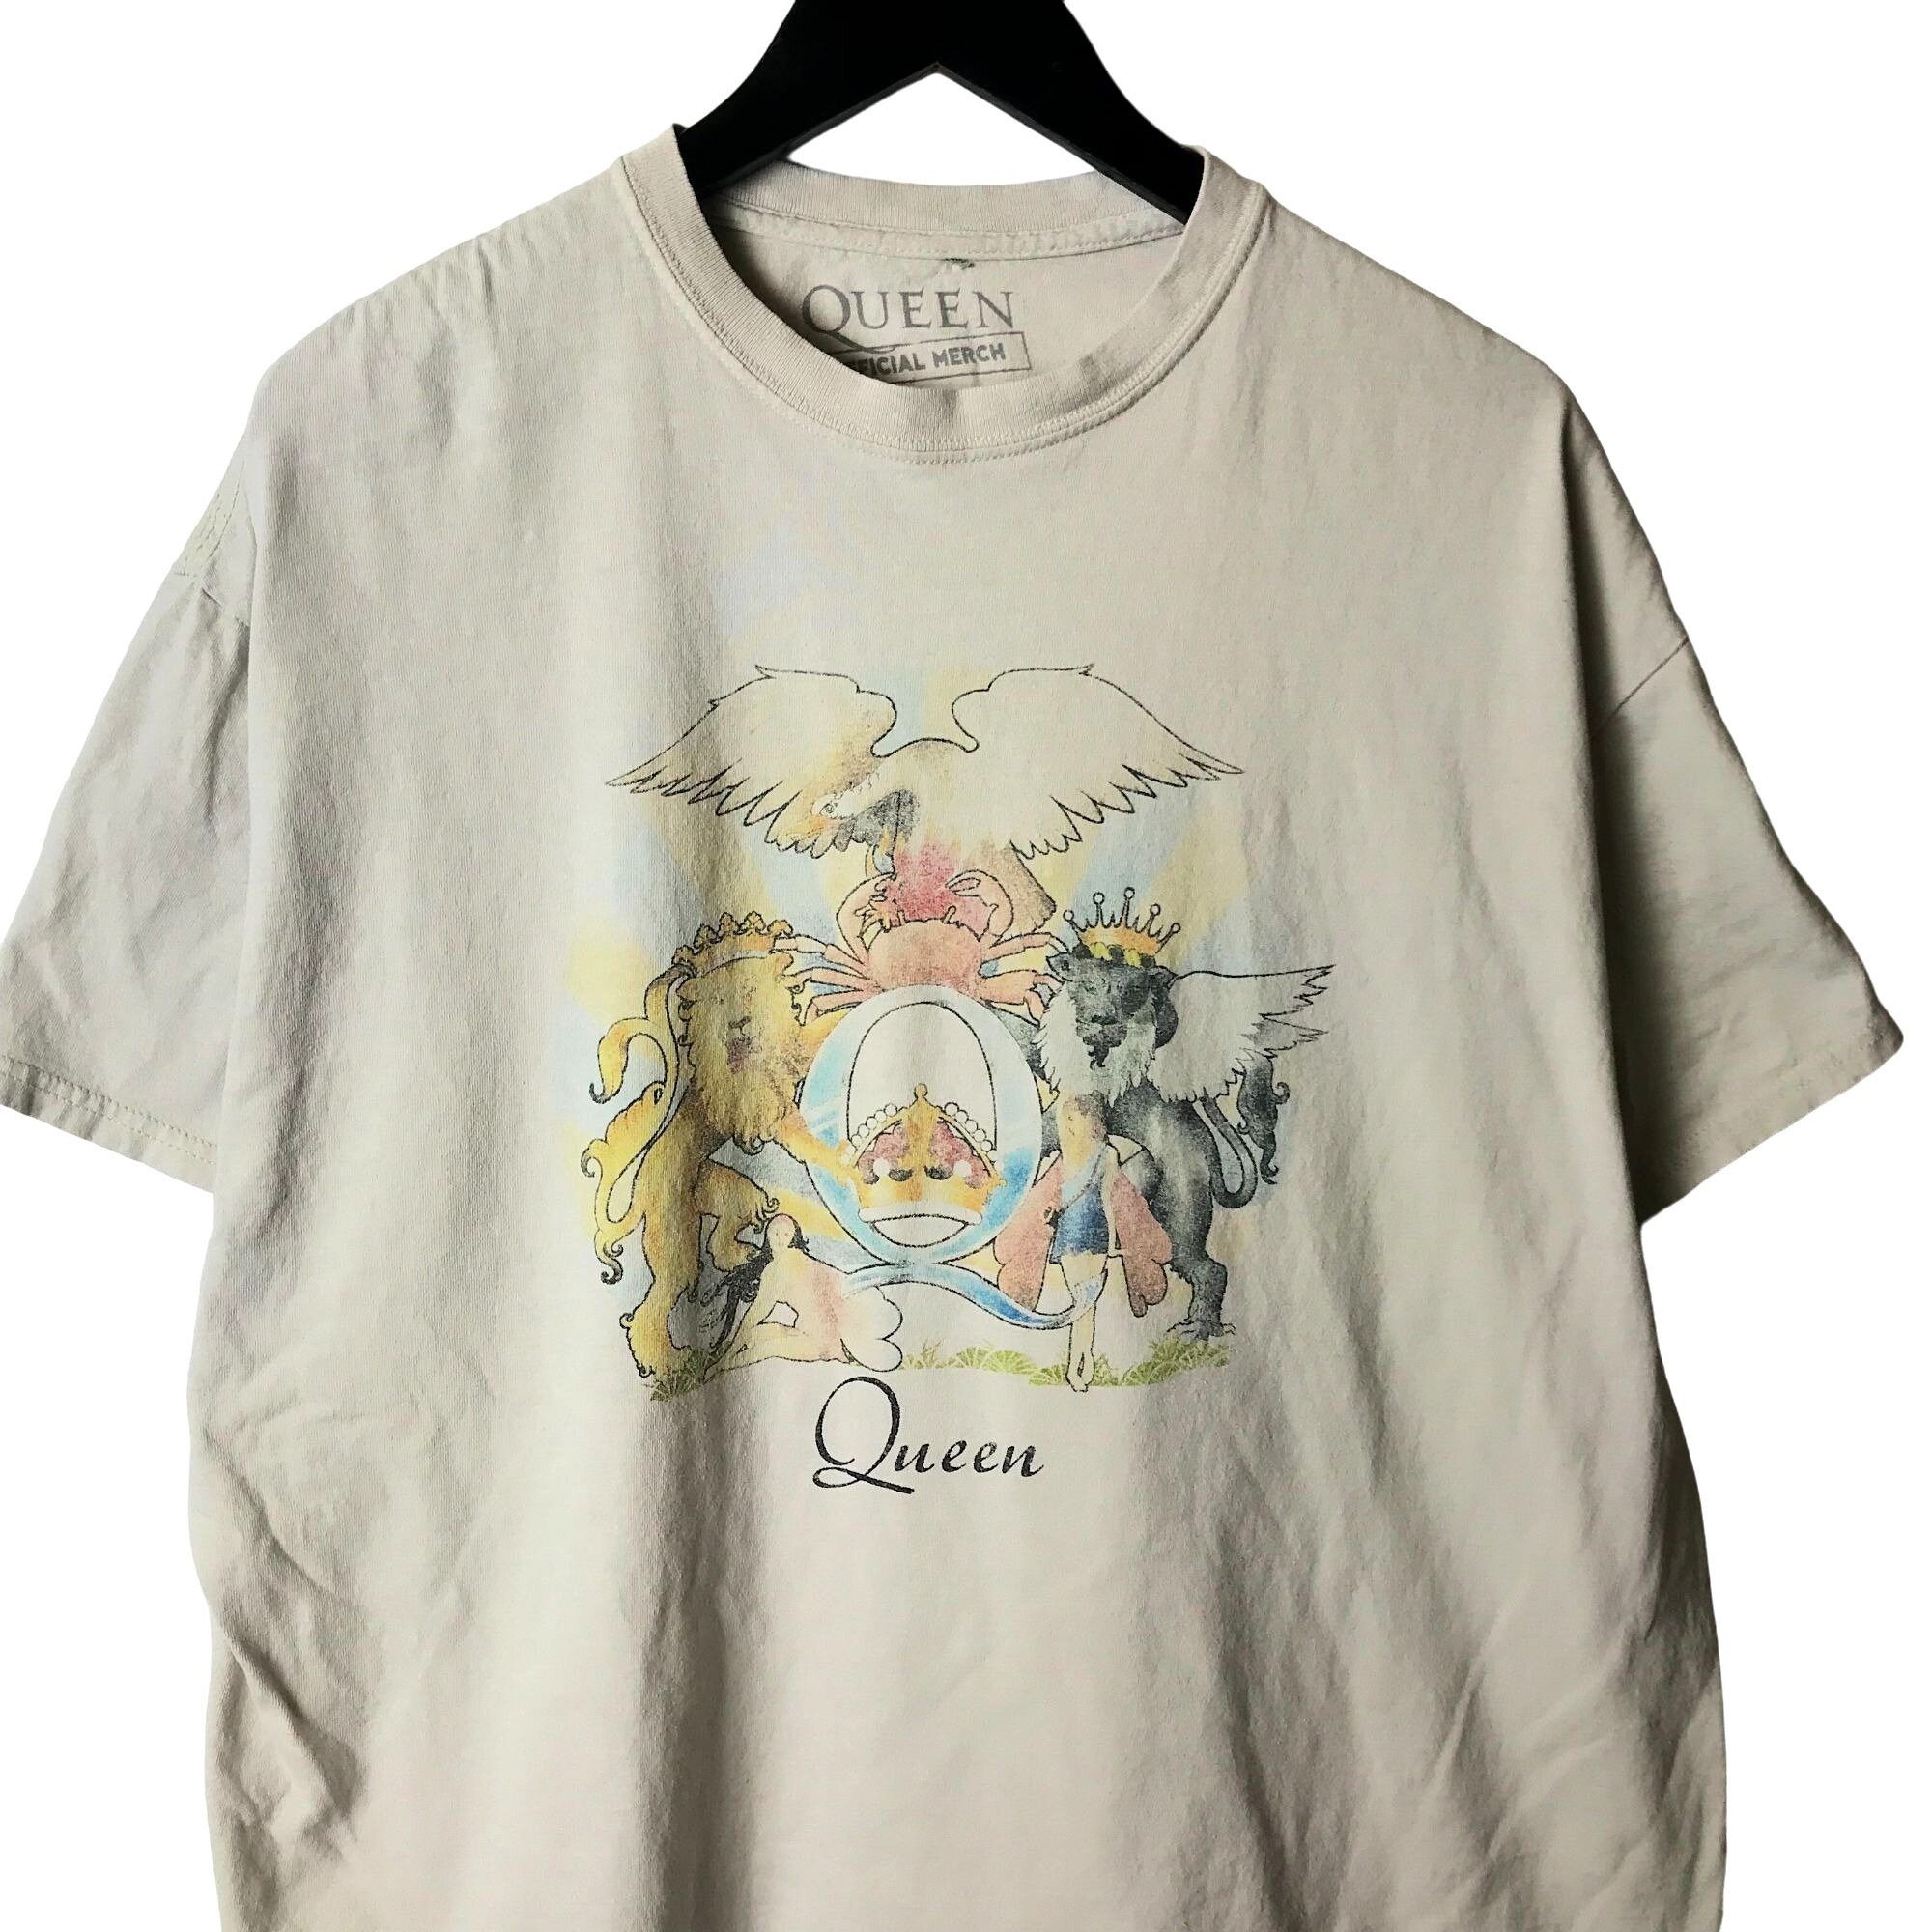 Urban Outfitters Queen T Shirt Crown British Rock Band Music Graphic ...